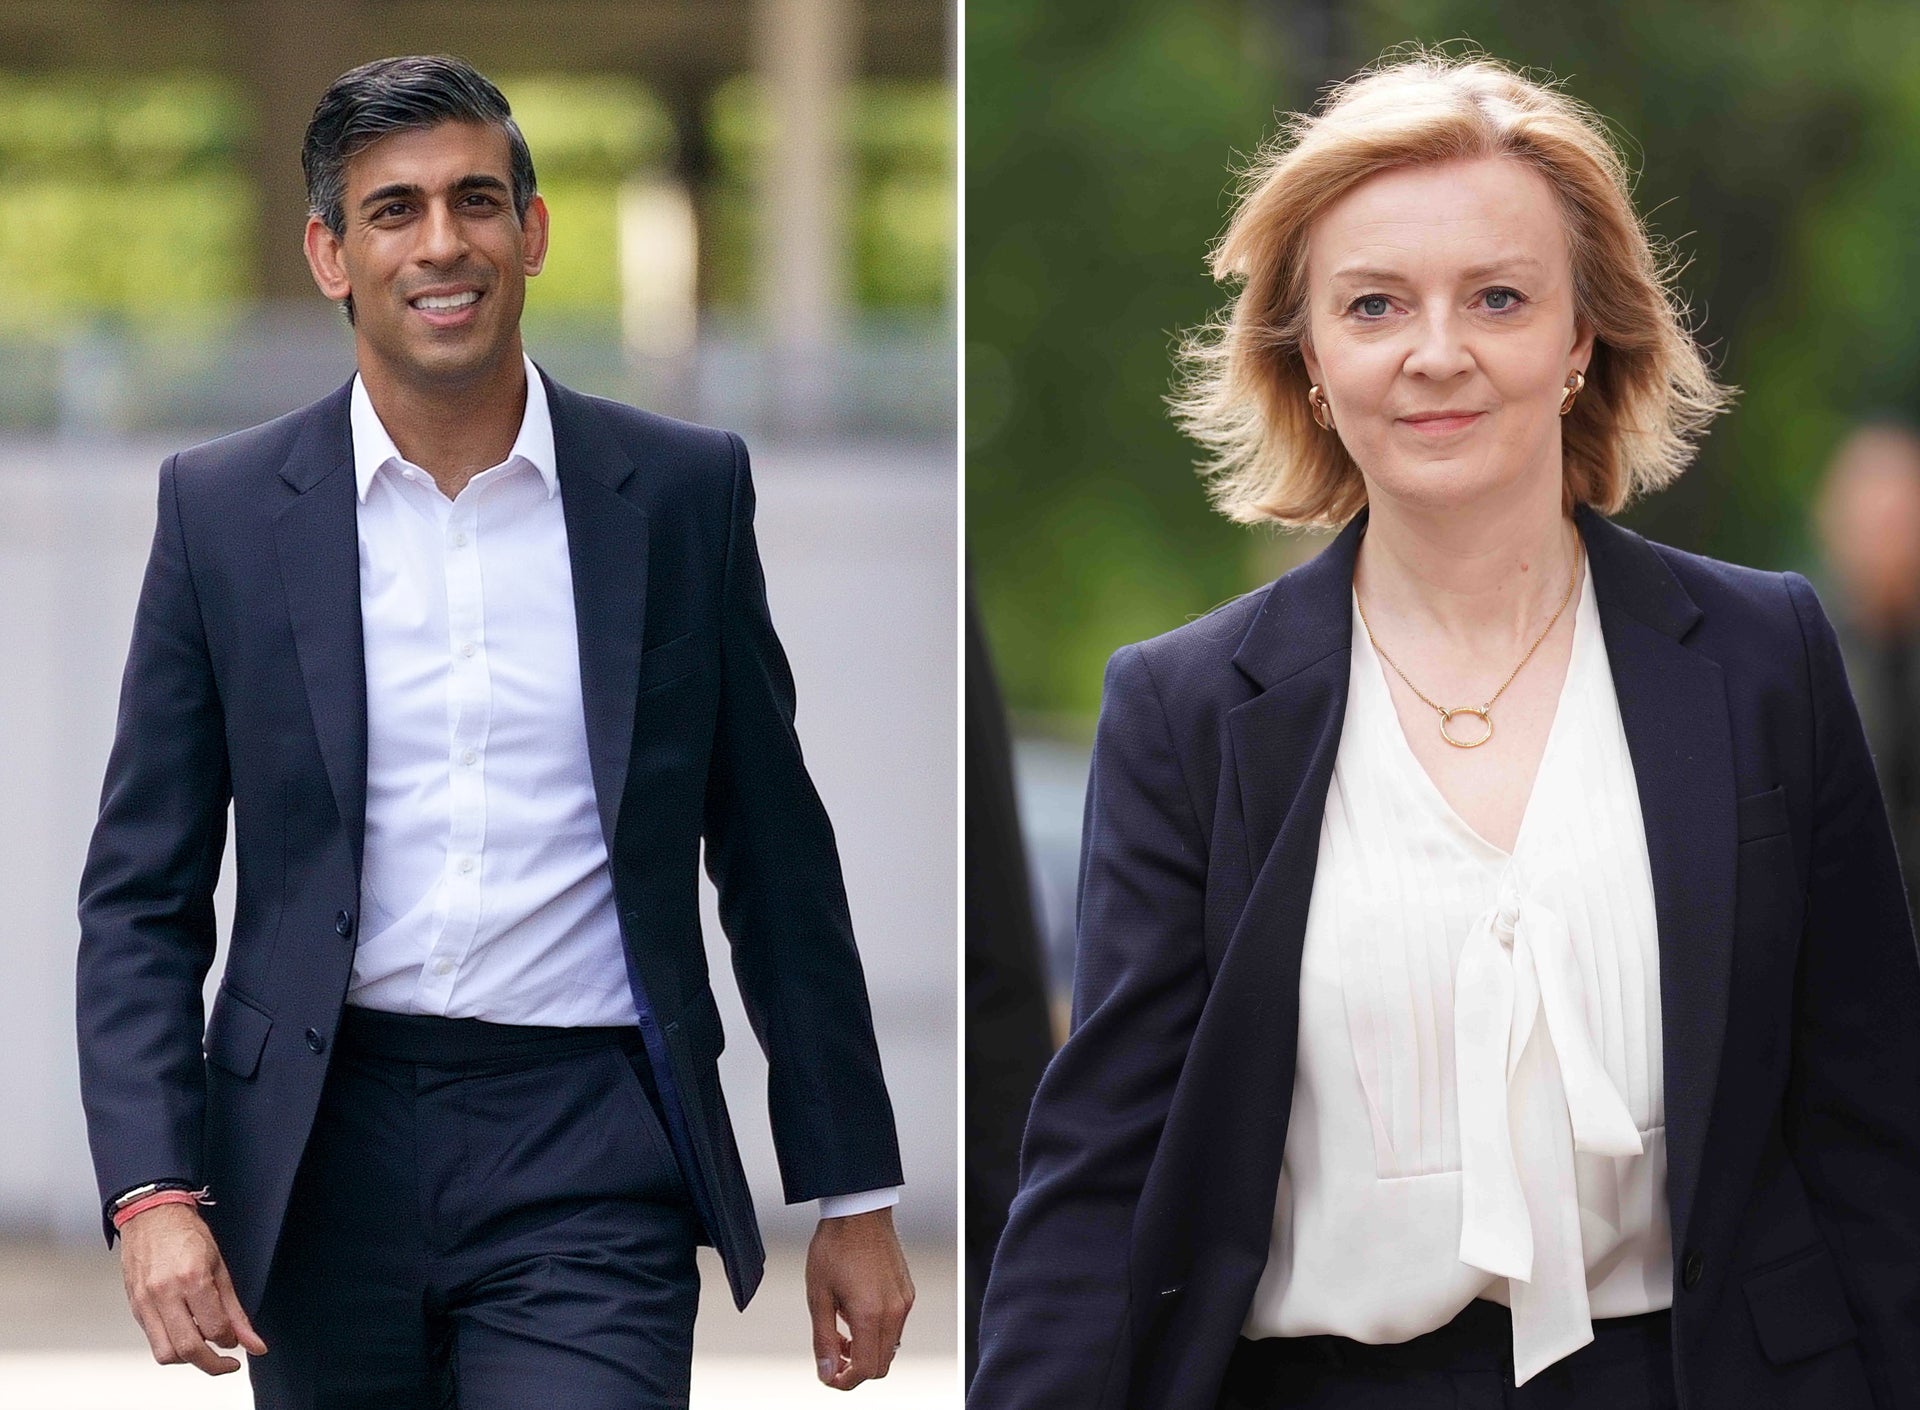 Sunak and Truss favour different methods in response to soaring energy bills